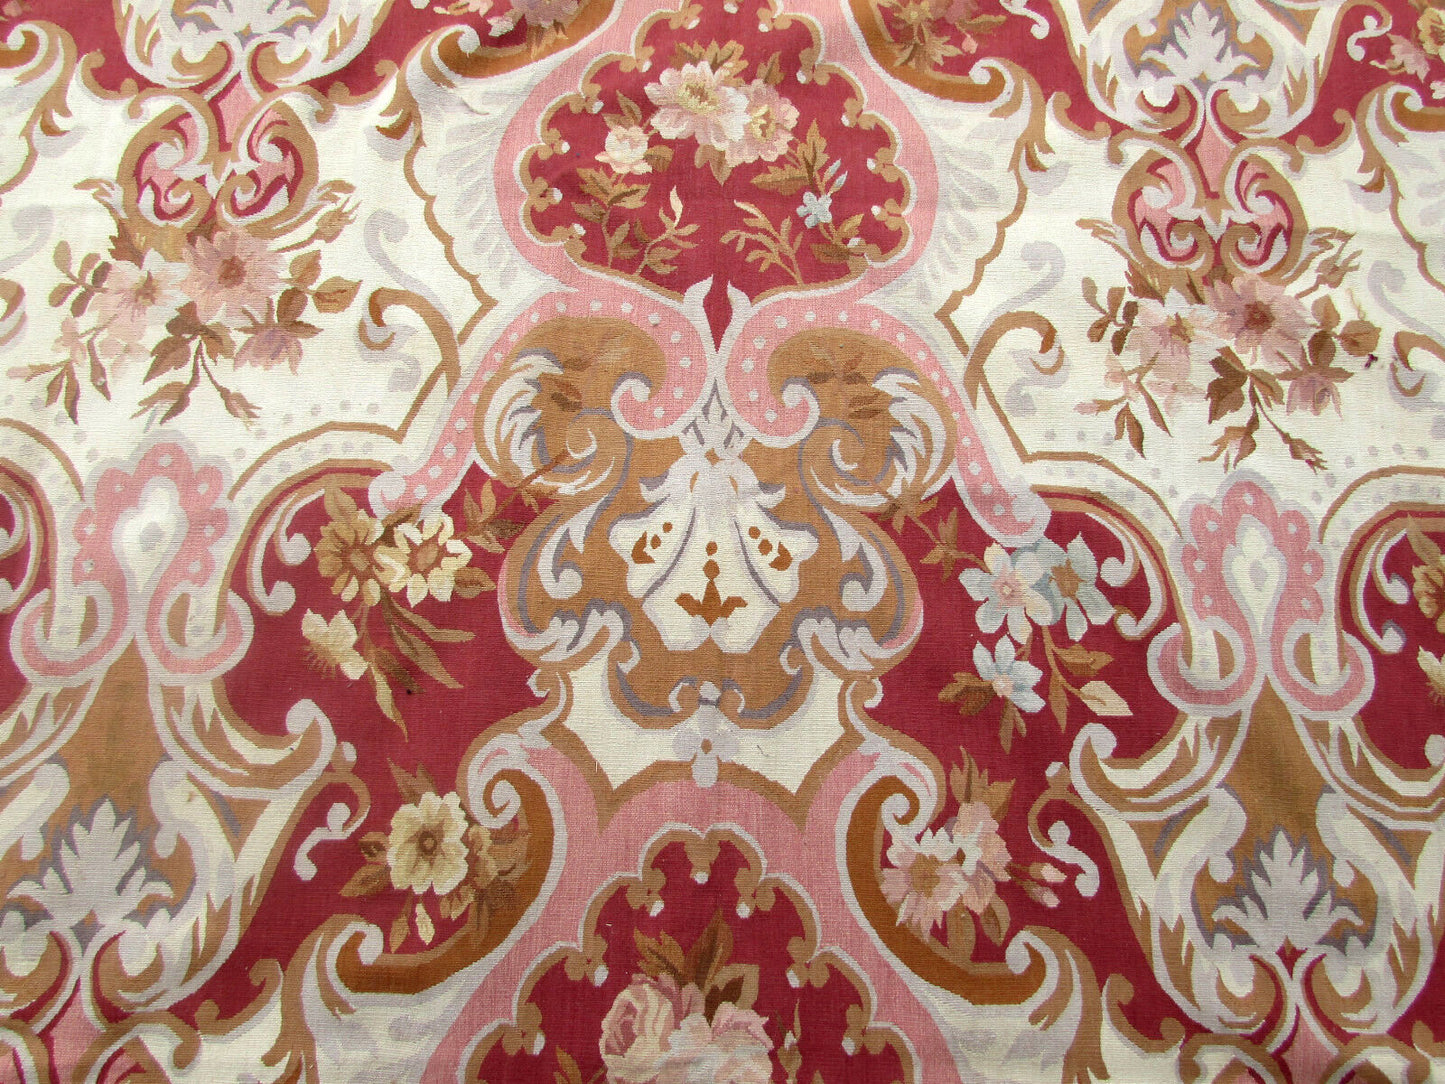 A detailed look at the original good condition of the vintage Aubusson Rug